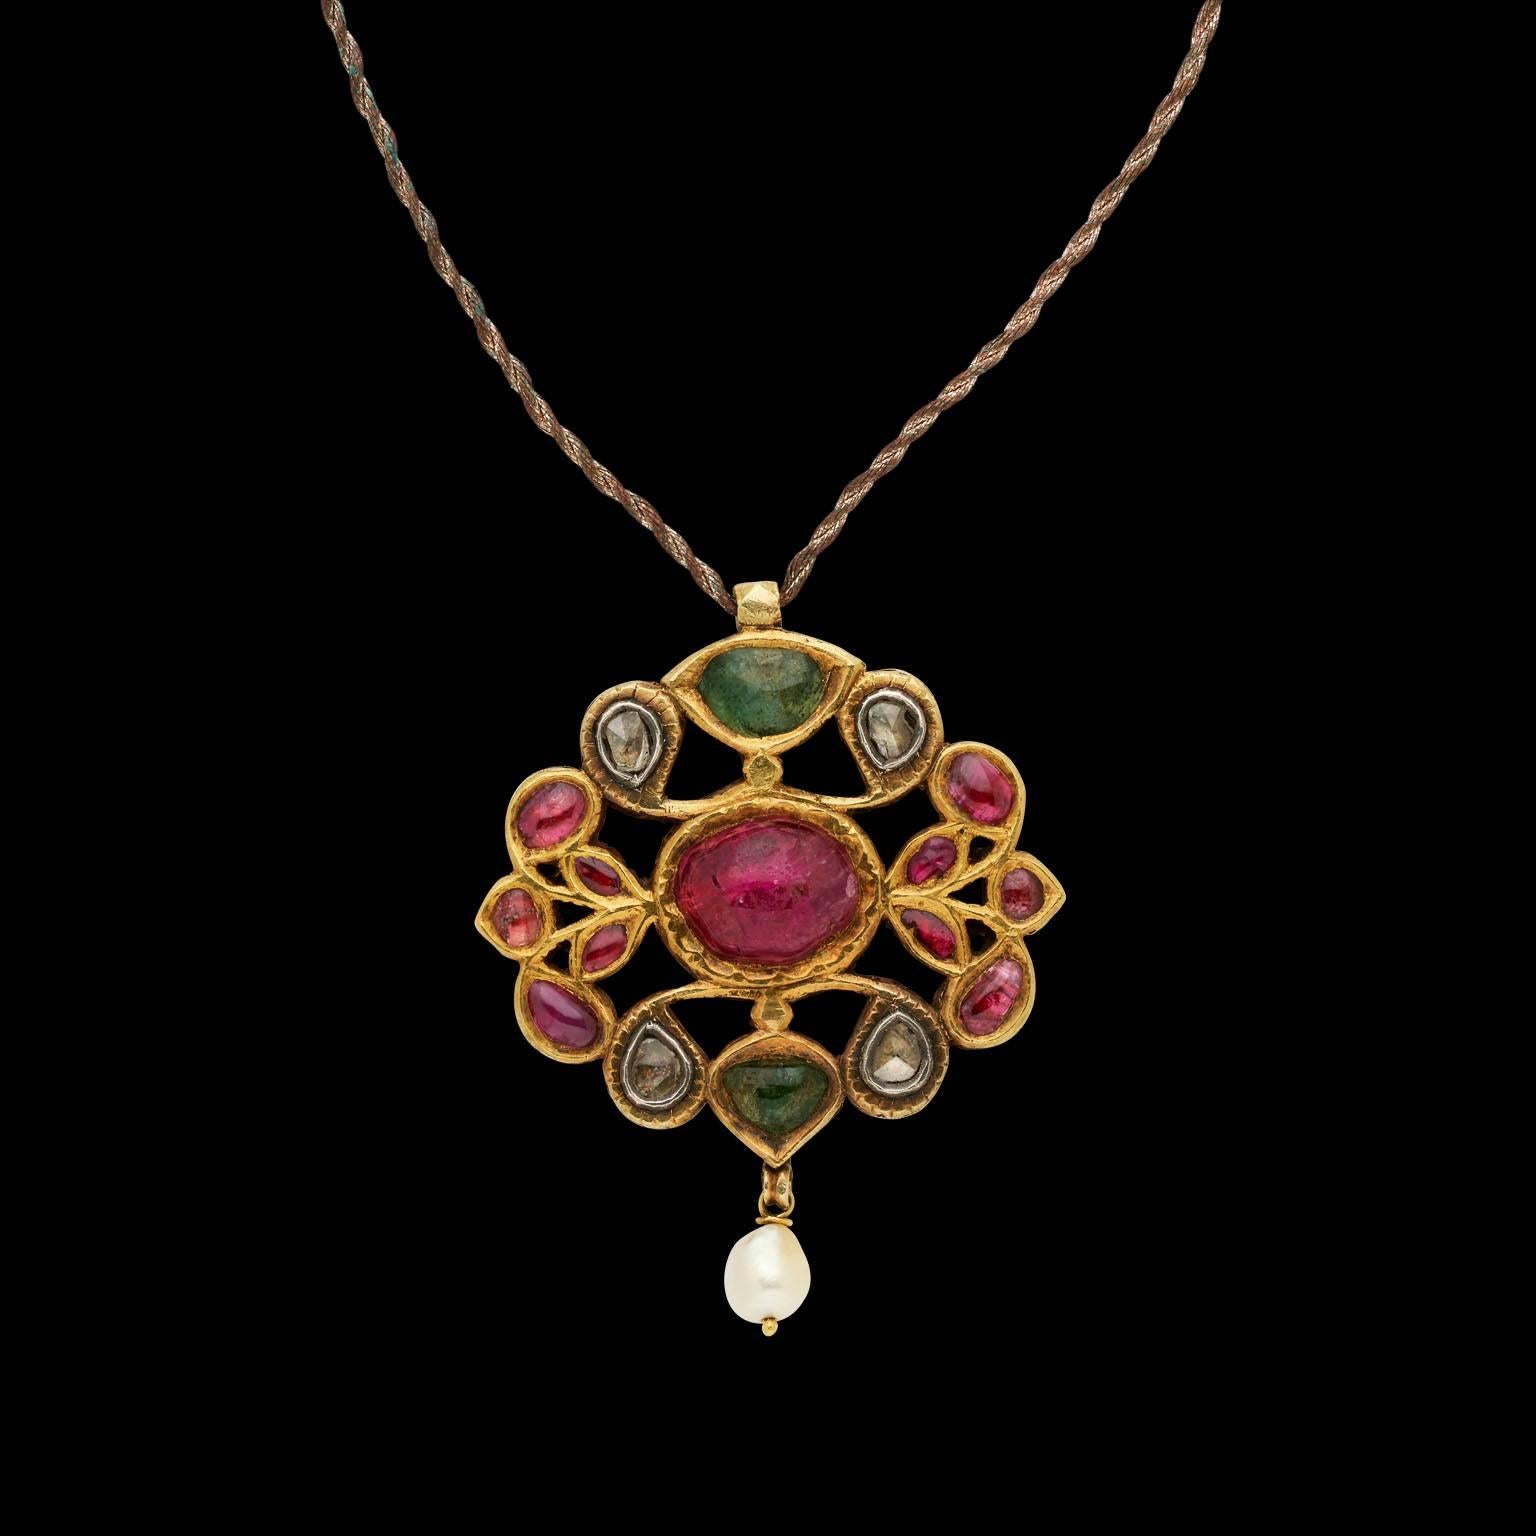 Pendant
Gujrat, Western India
Early 19th century

Fabricated from gold, set in kundan (traditional pure gold setting) technique with diamonds, emeralds and a central cabochon ruby, with pendant pearl. The reverse is plain gold.

